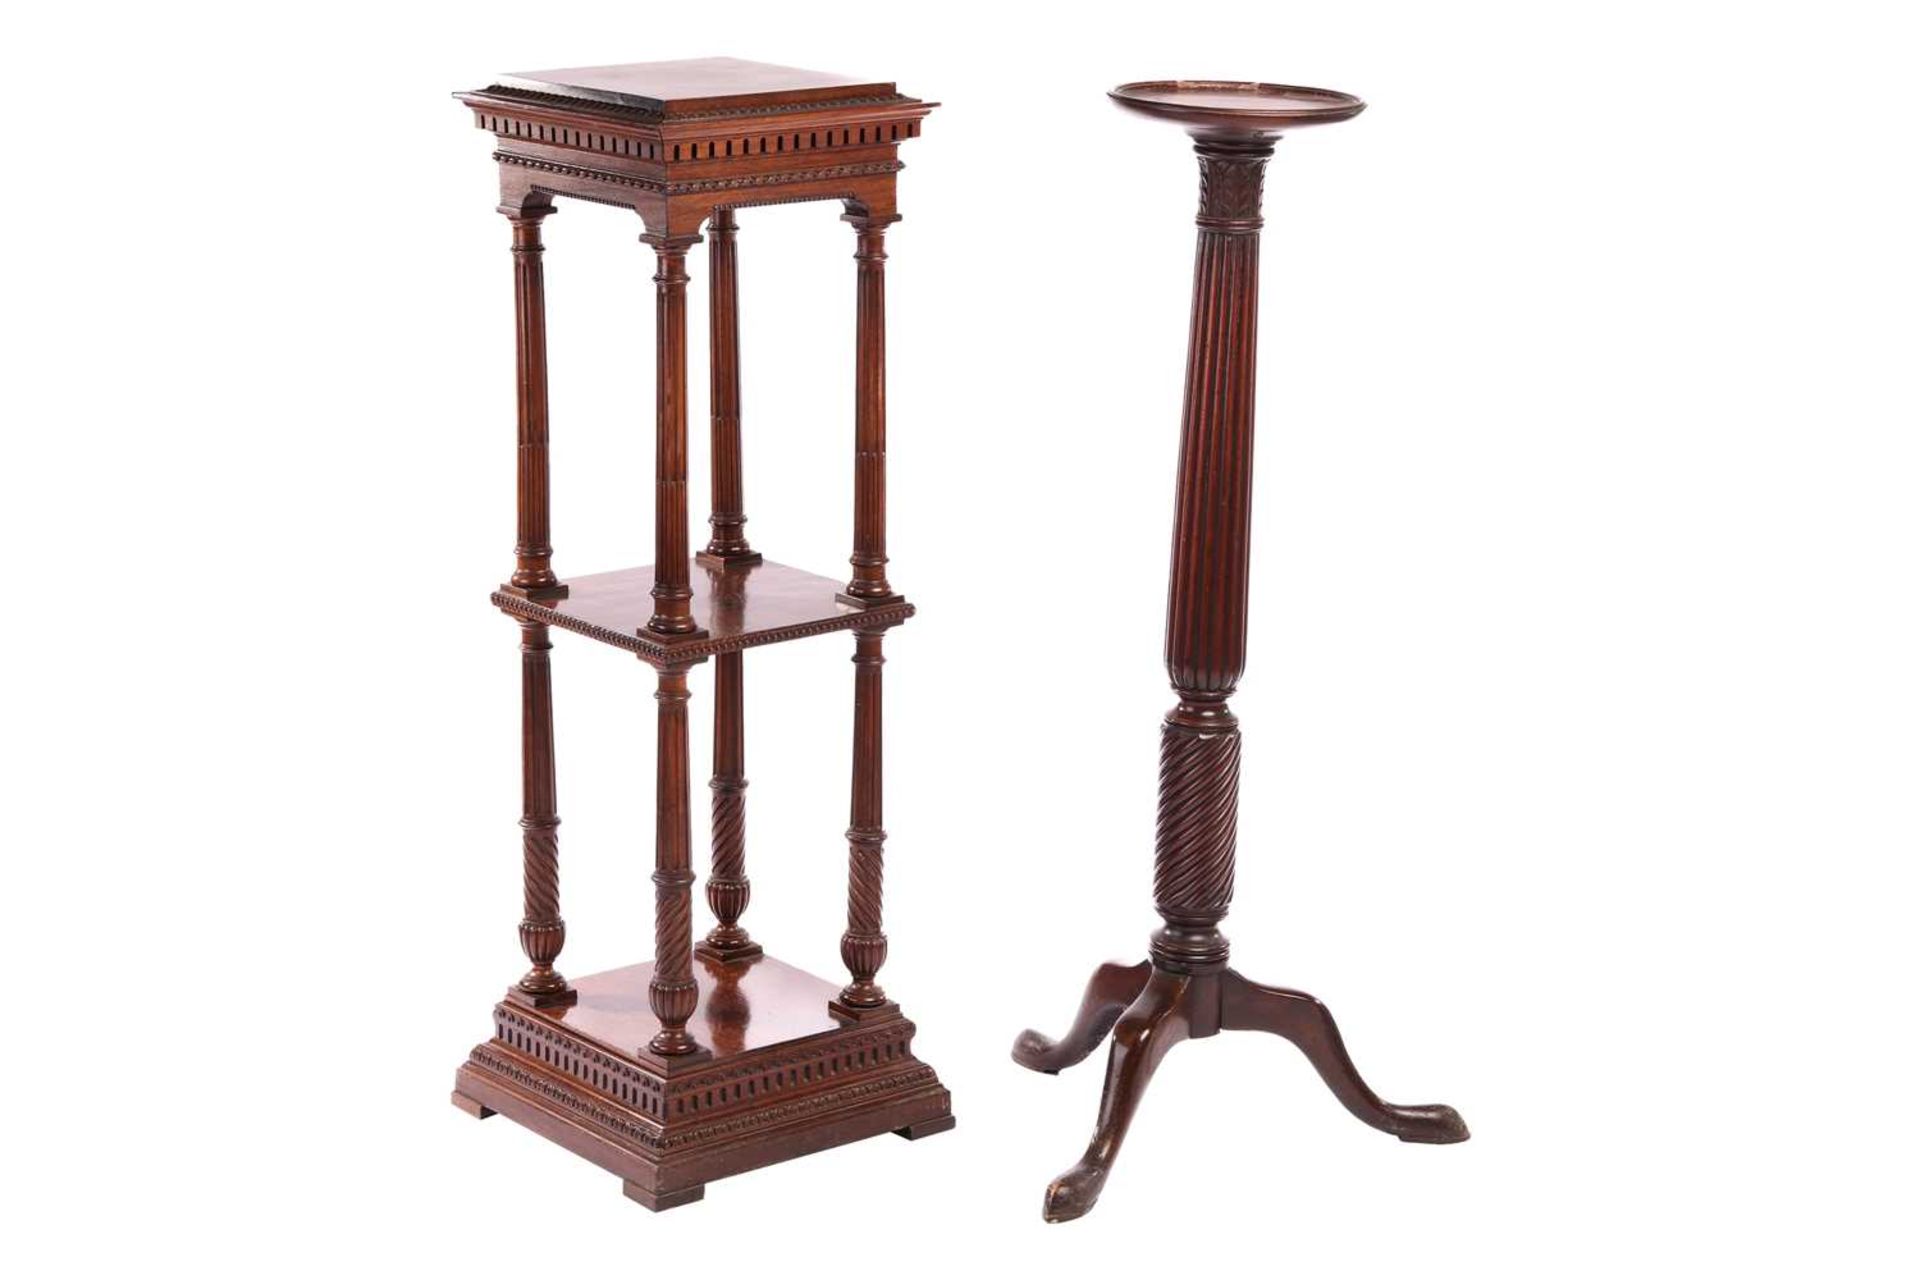 An Edwardian mahogany two-tier pedestal of architectural, form with dentil moulding and fluted colum